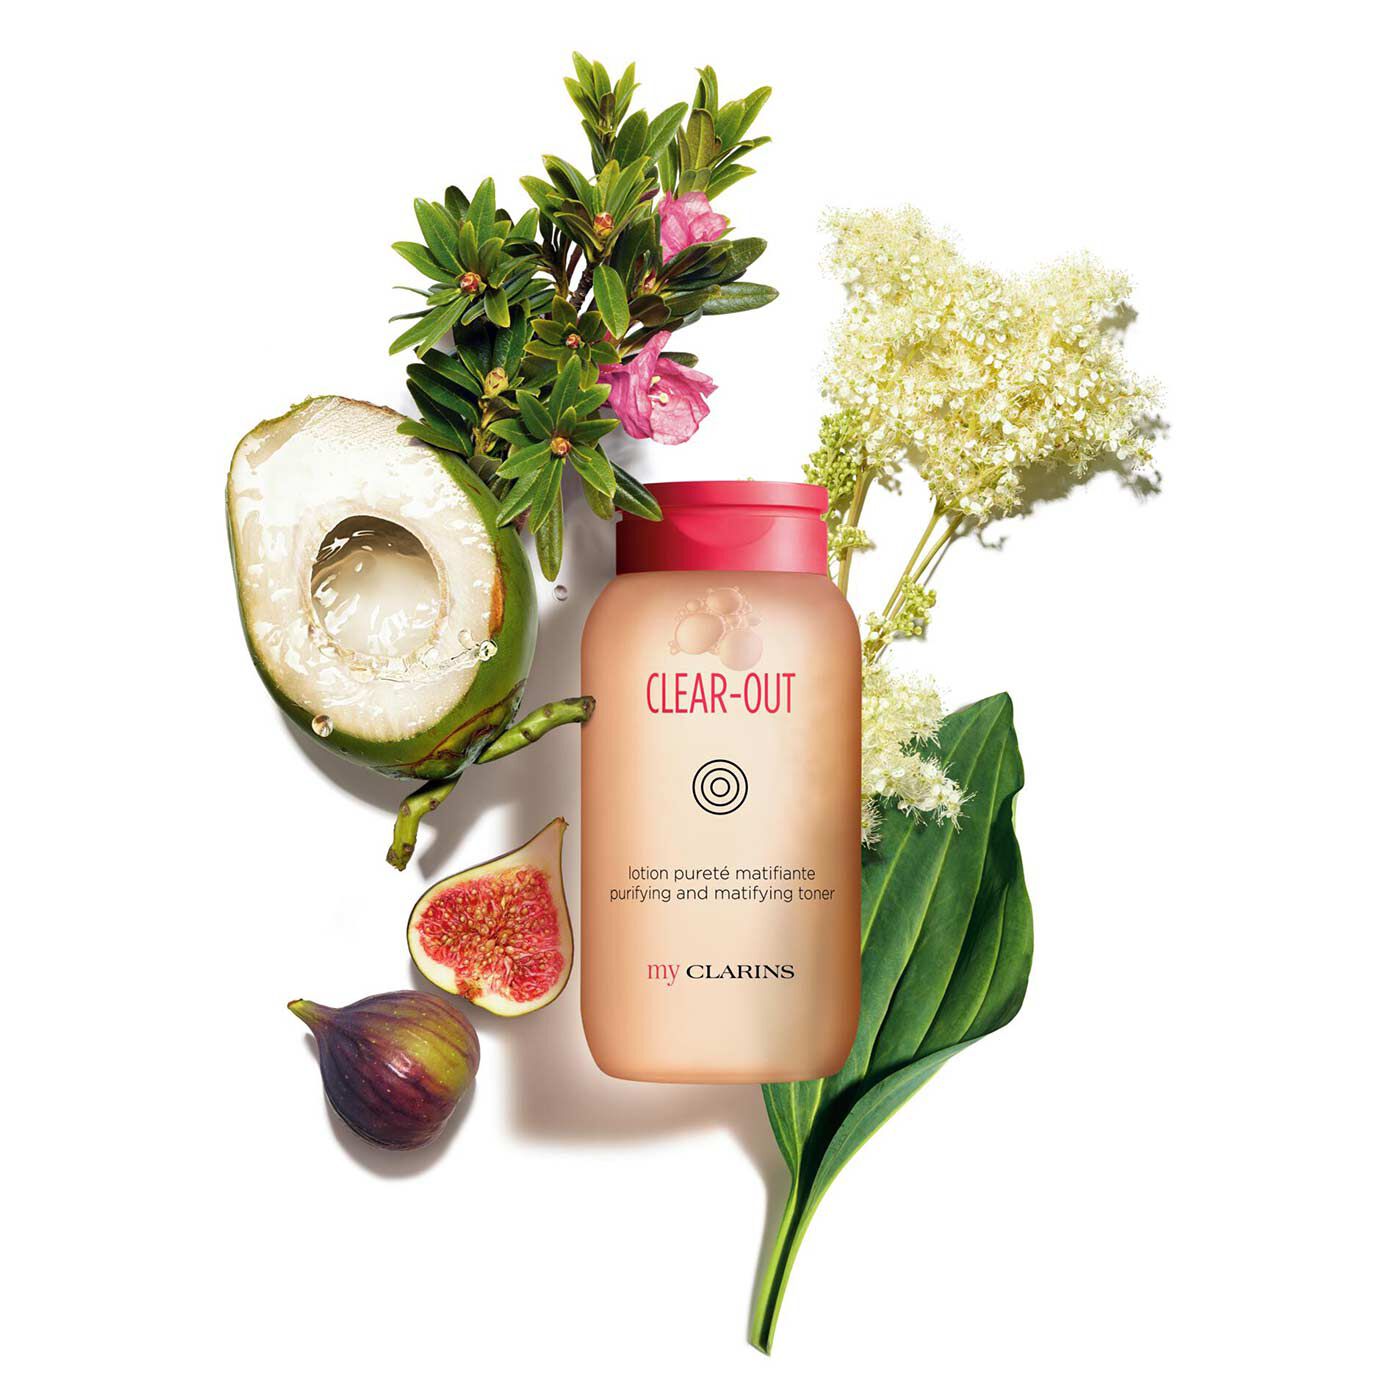 My Clarins CLEAR-OUT purifying and matifying toner